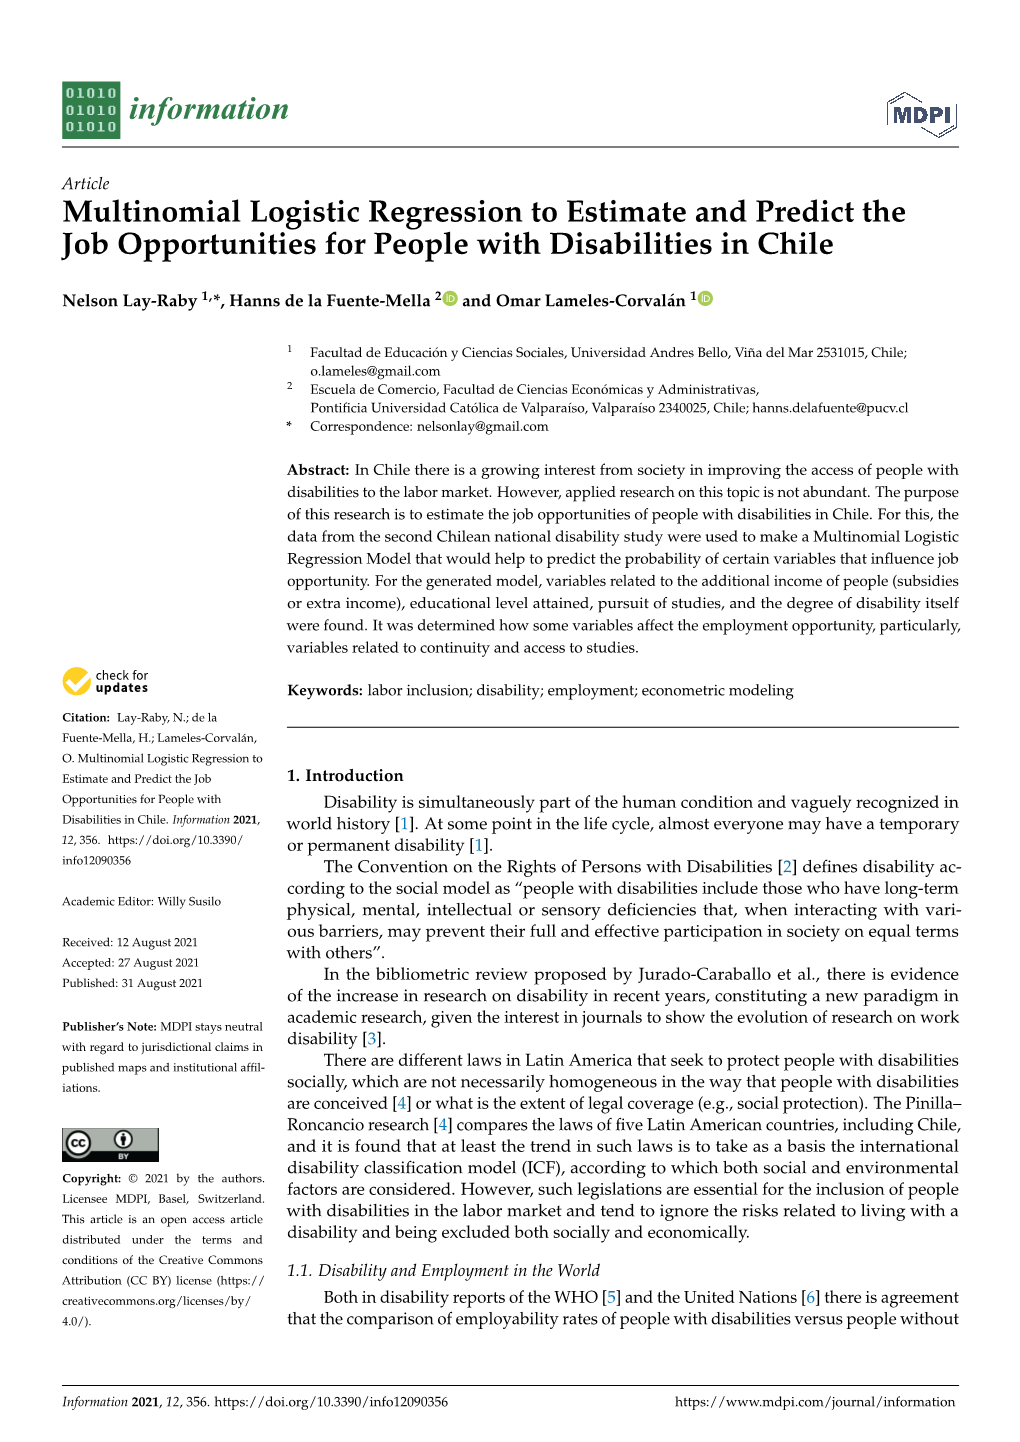 Multinomial Logistic Regression to Estimate and Predict the Job Opportunities for People with Disabilities in Chile